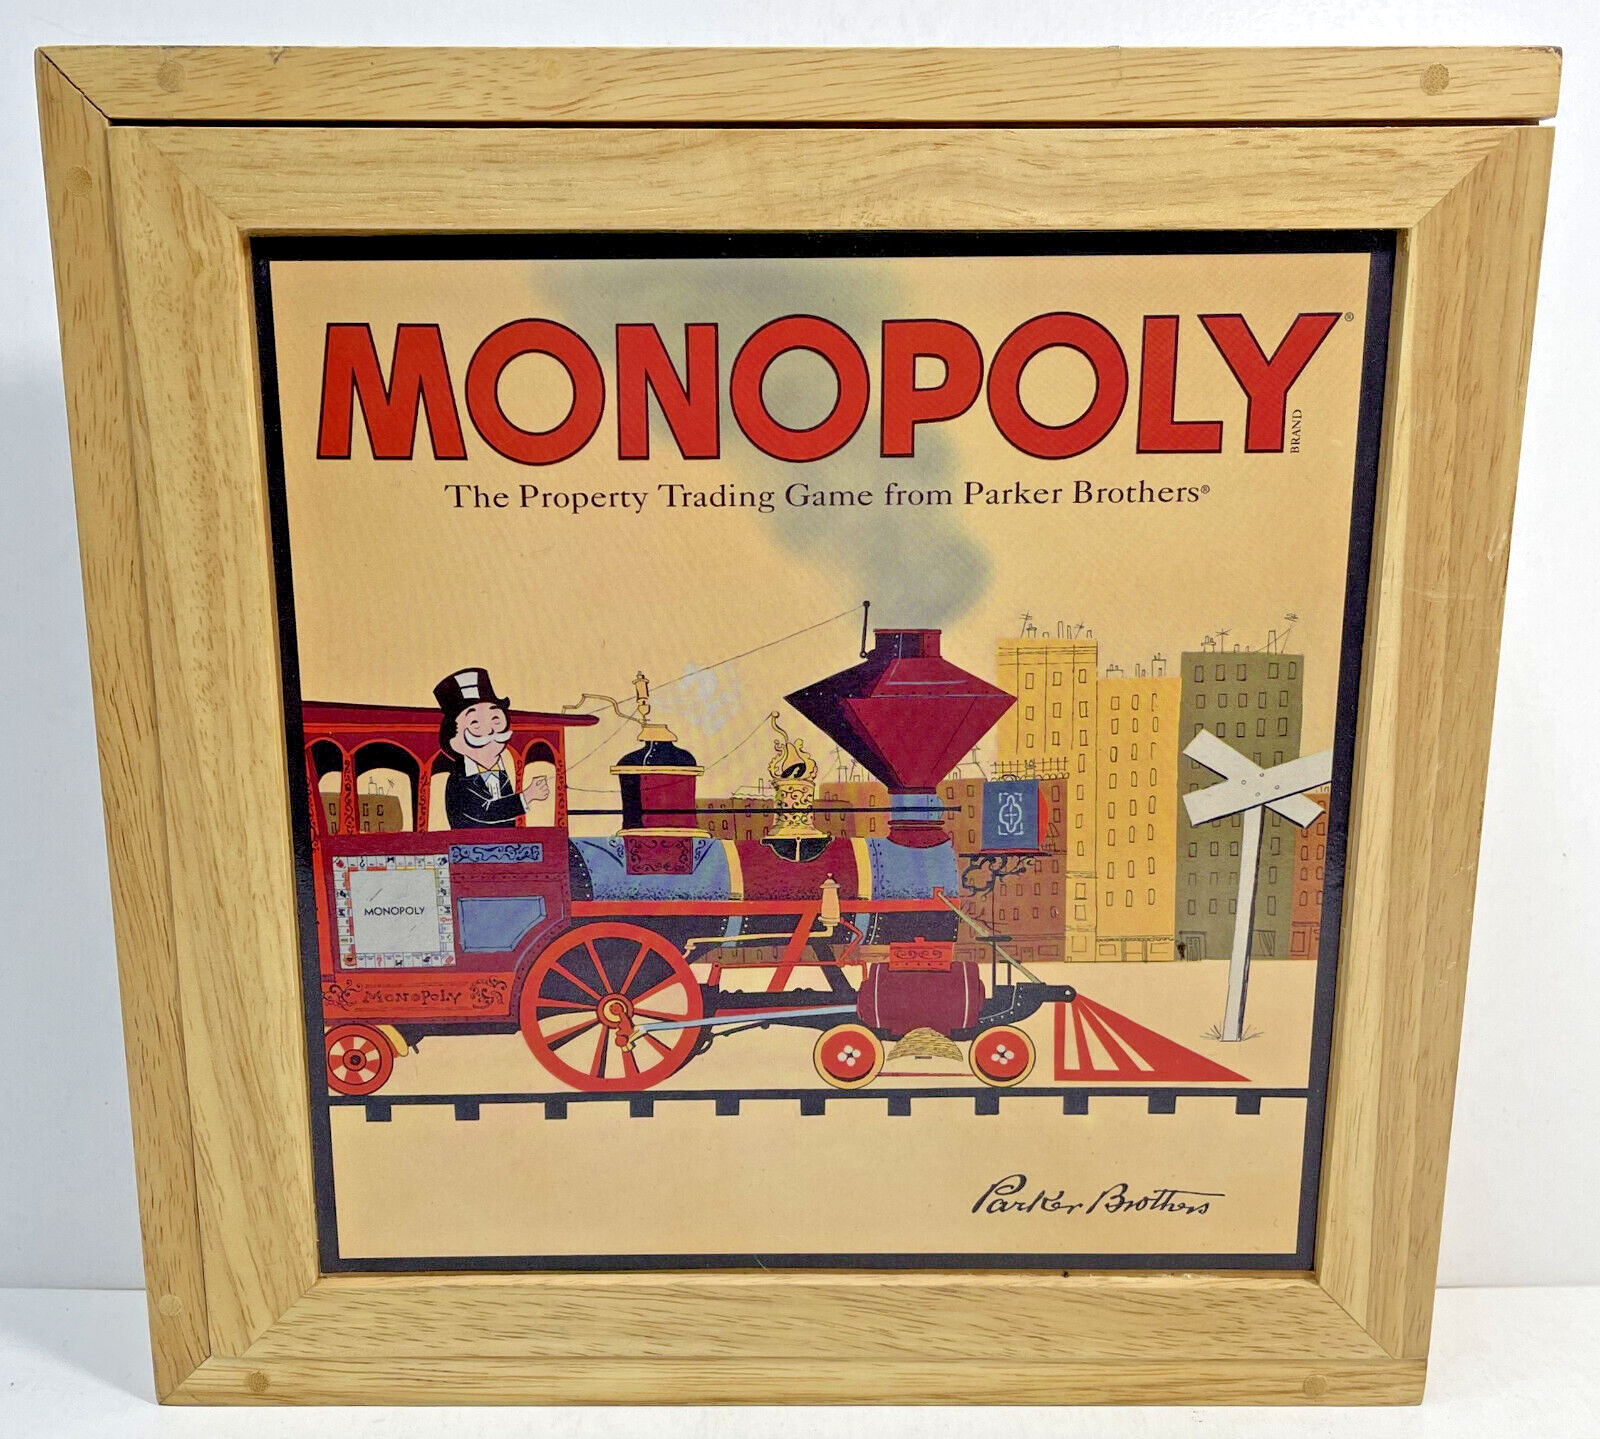 Primary image for Monopoly Board Game (Parker Brothers, 2001) Wood/Wooden Case Box Complete